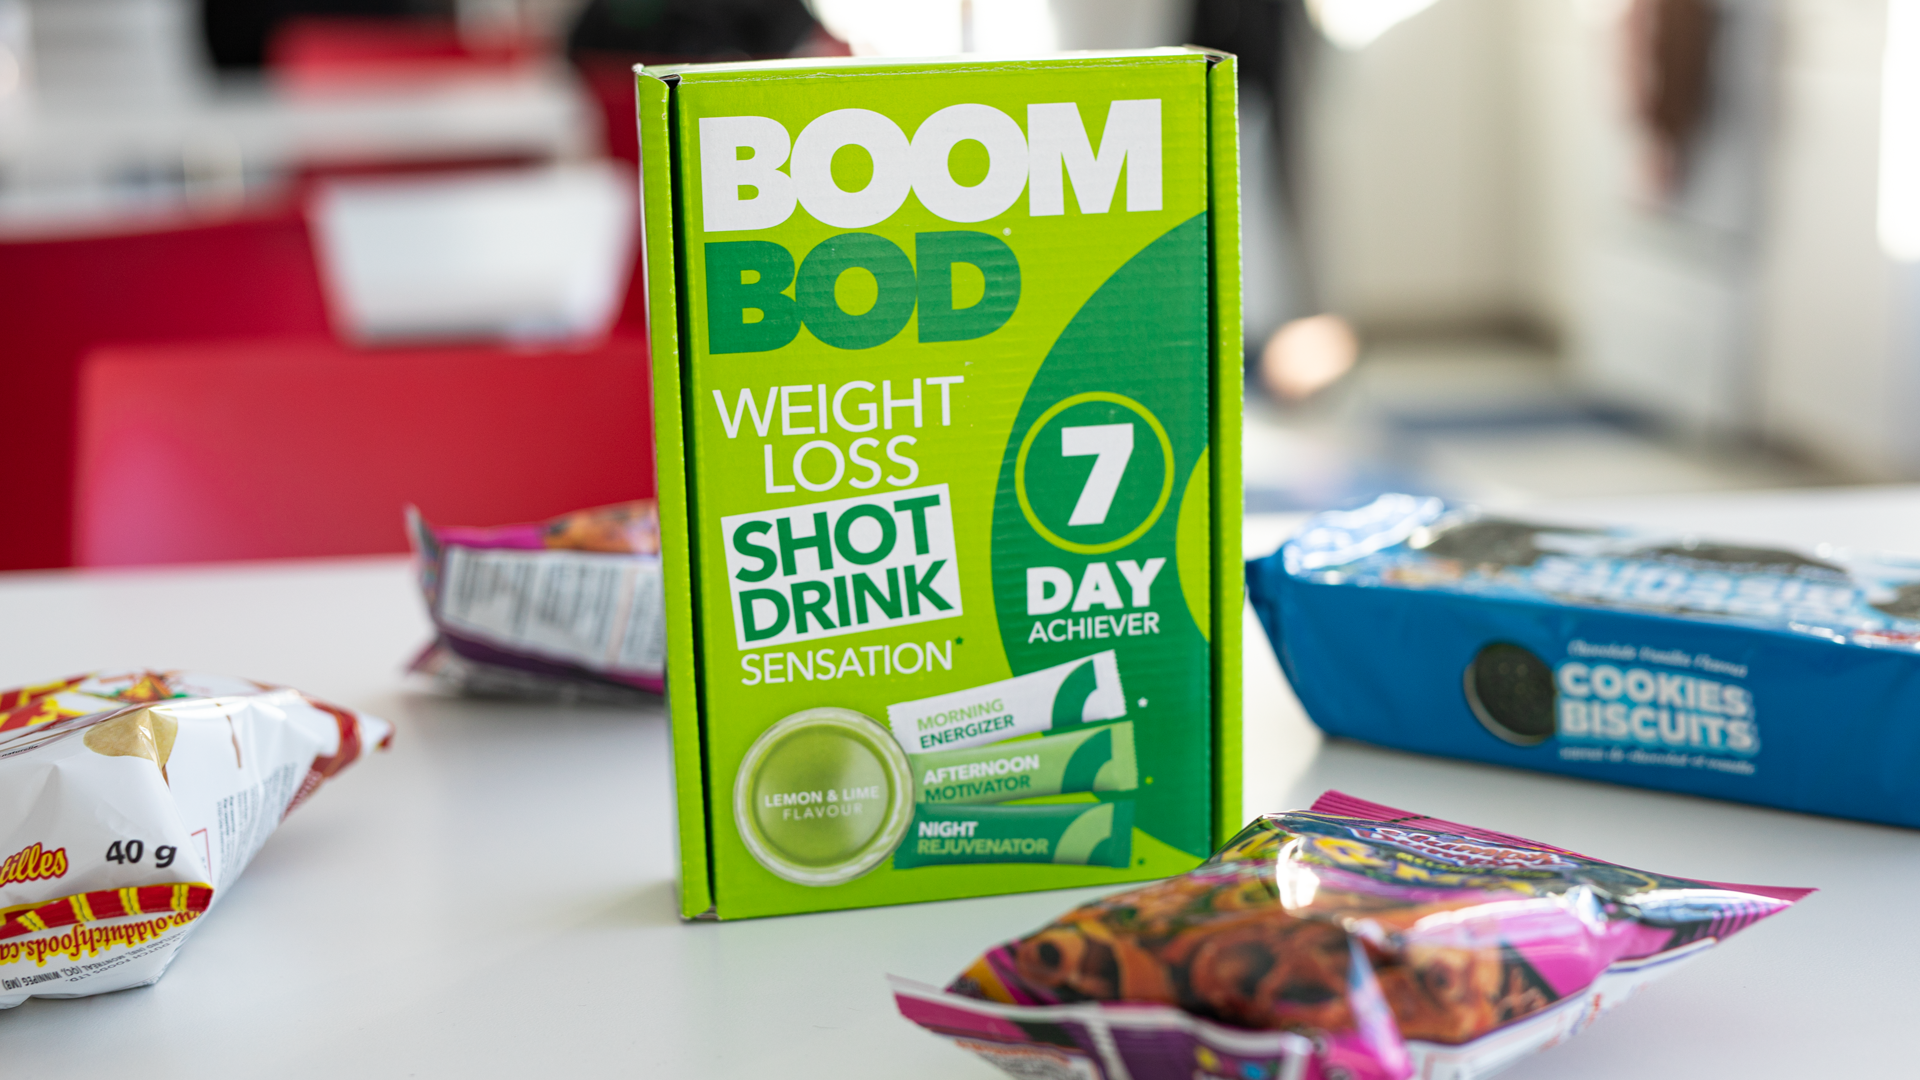 Boombod Helps Banish Cravings Stay On Track At Home